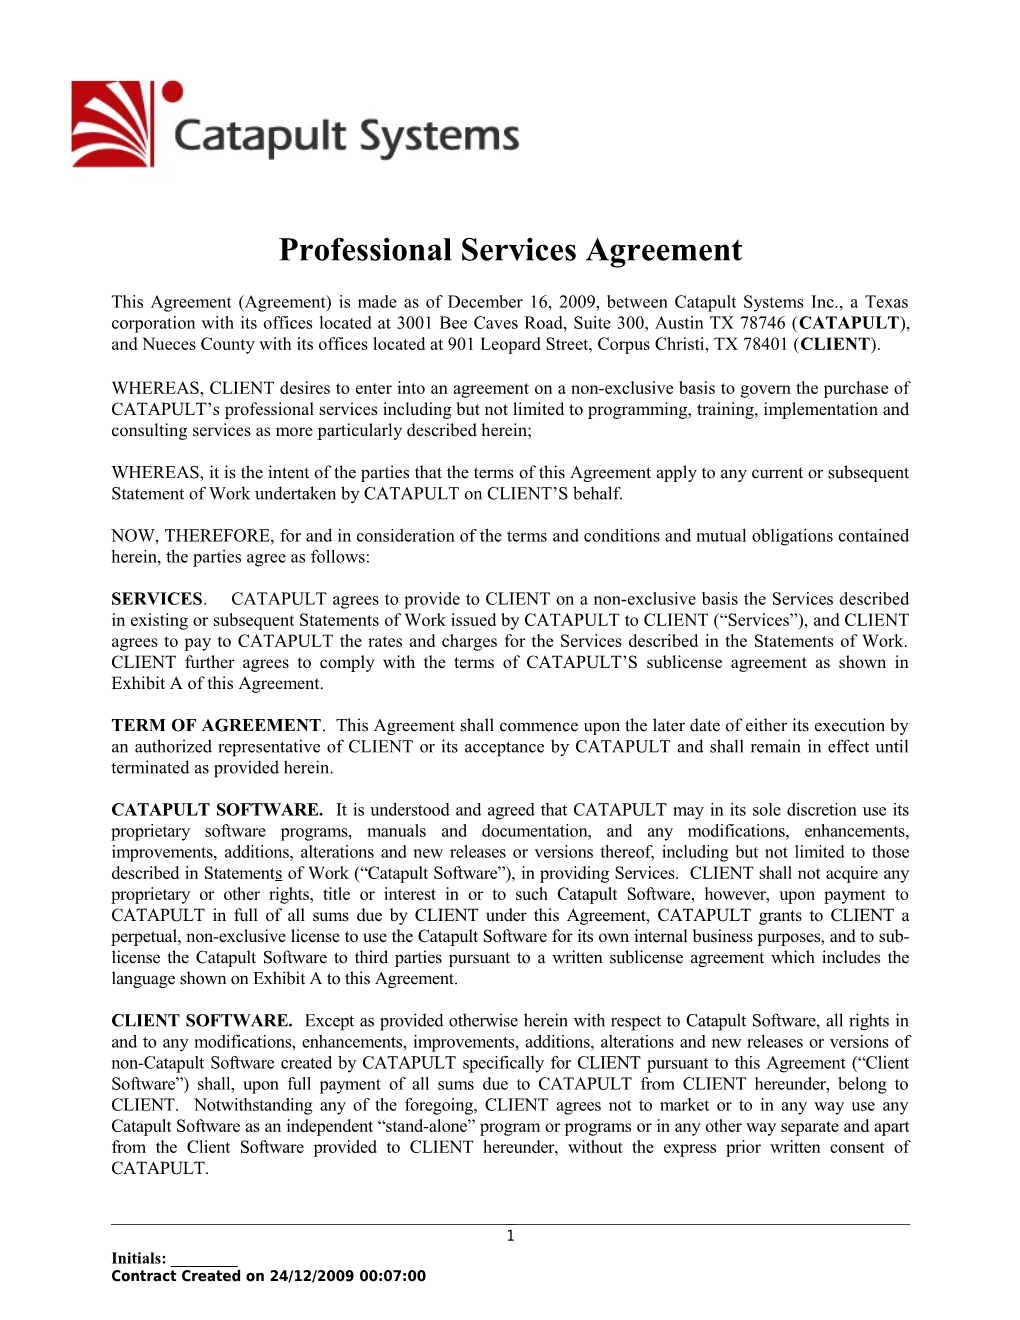 Professional Services Agreement s4